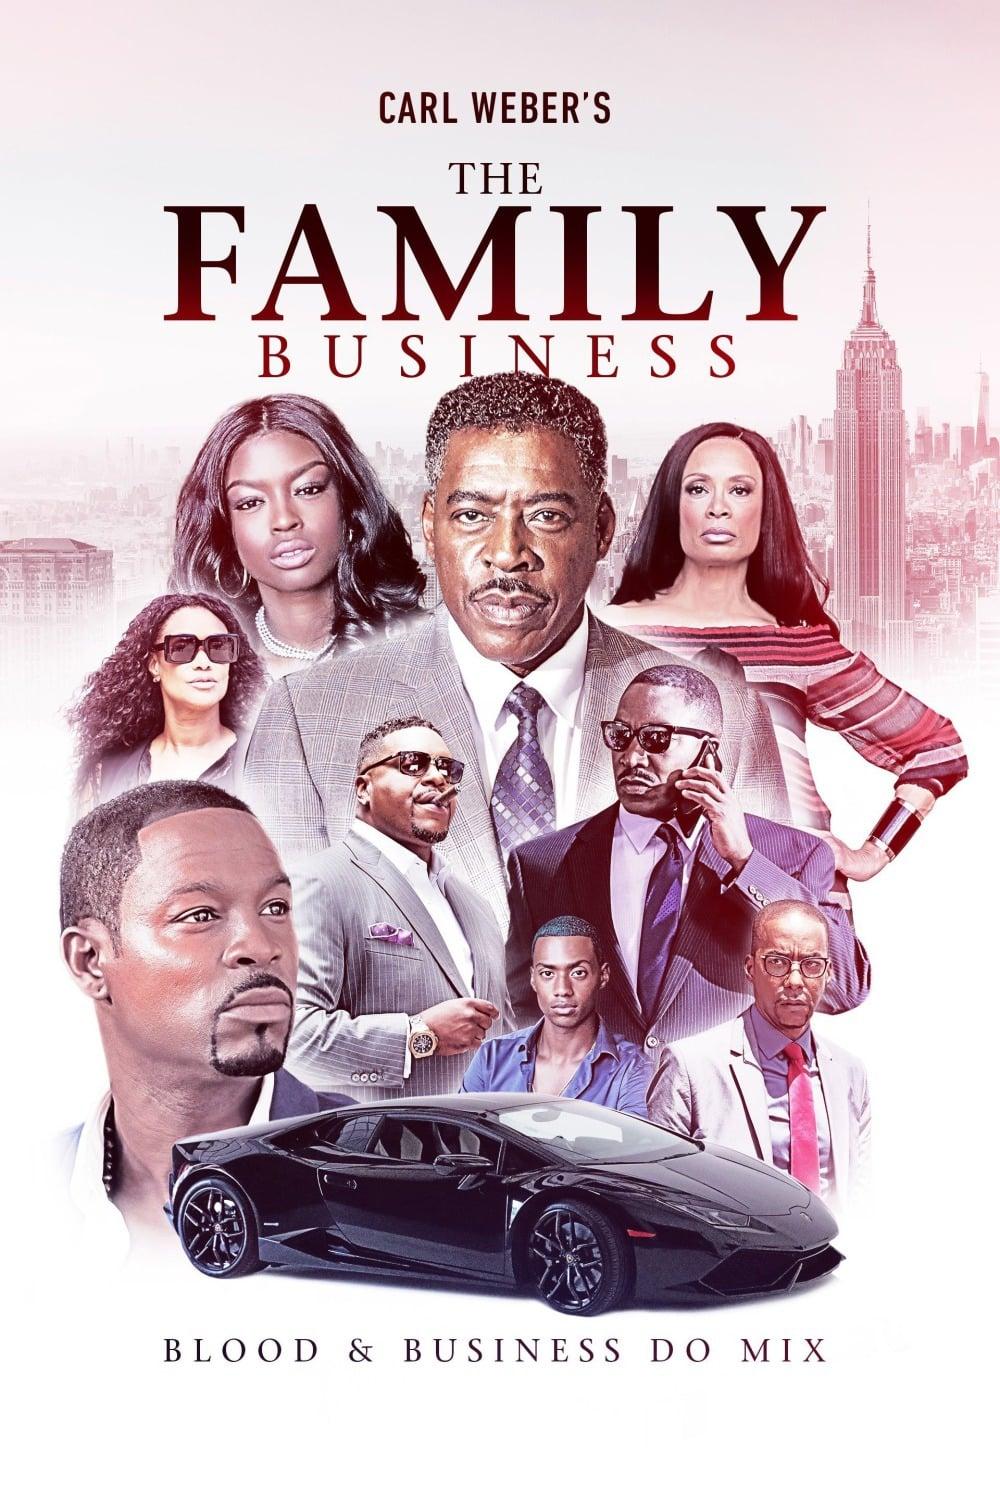 Carl Weber's The Family Business poster